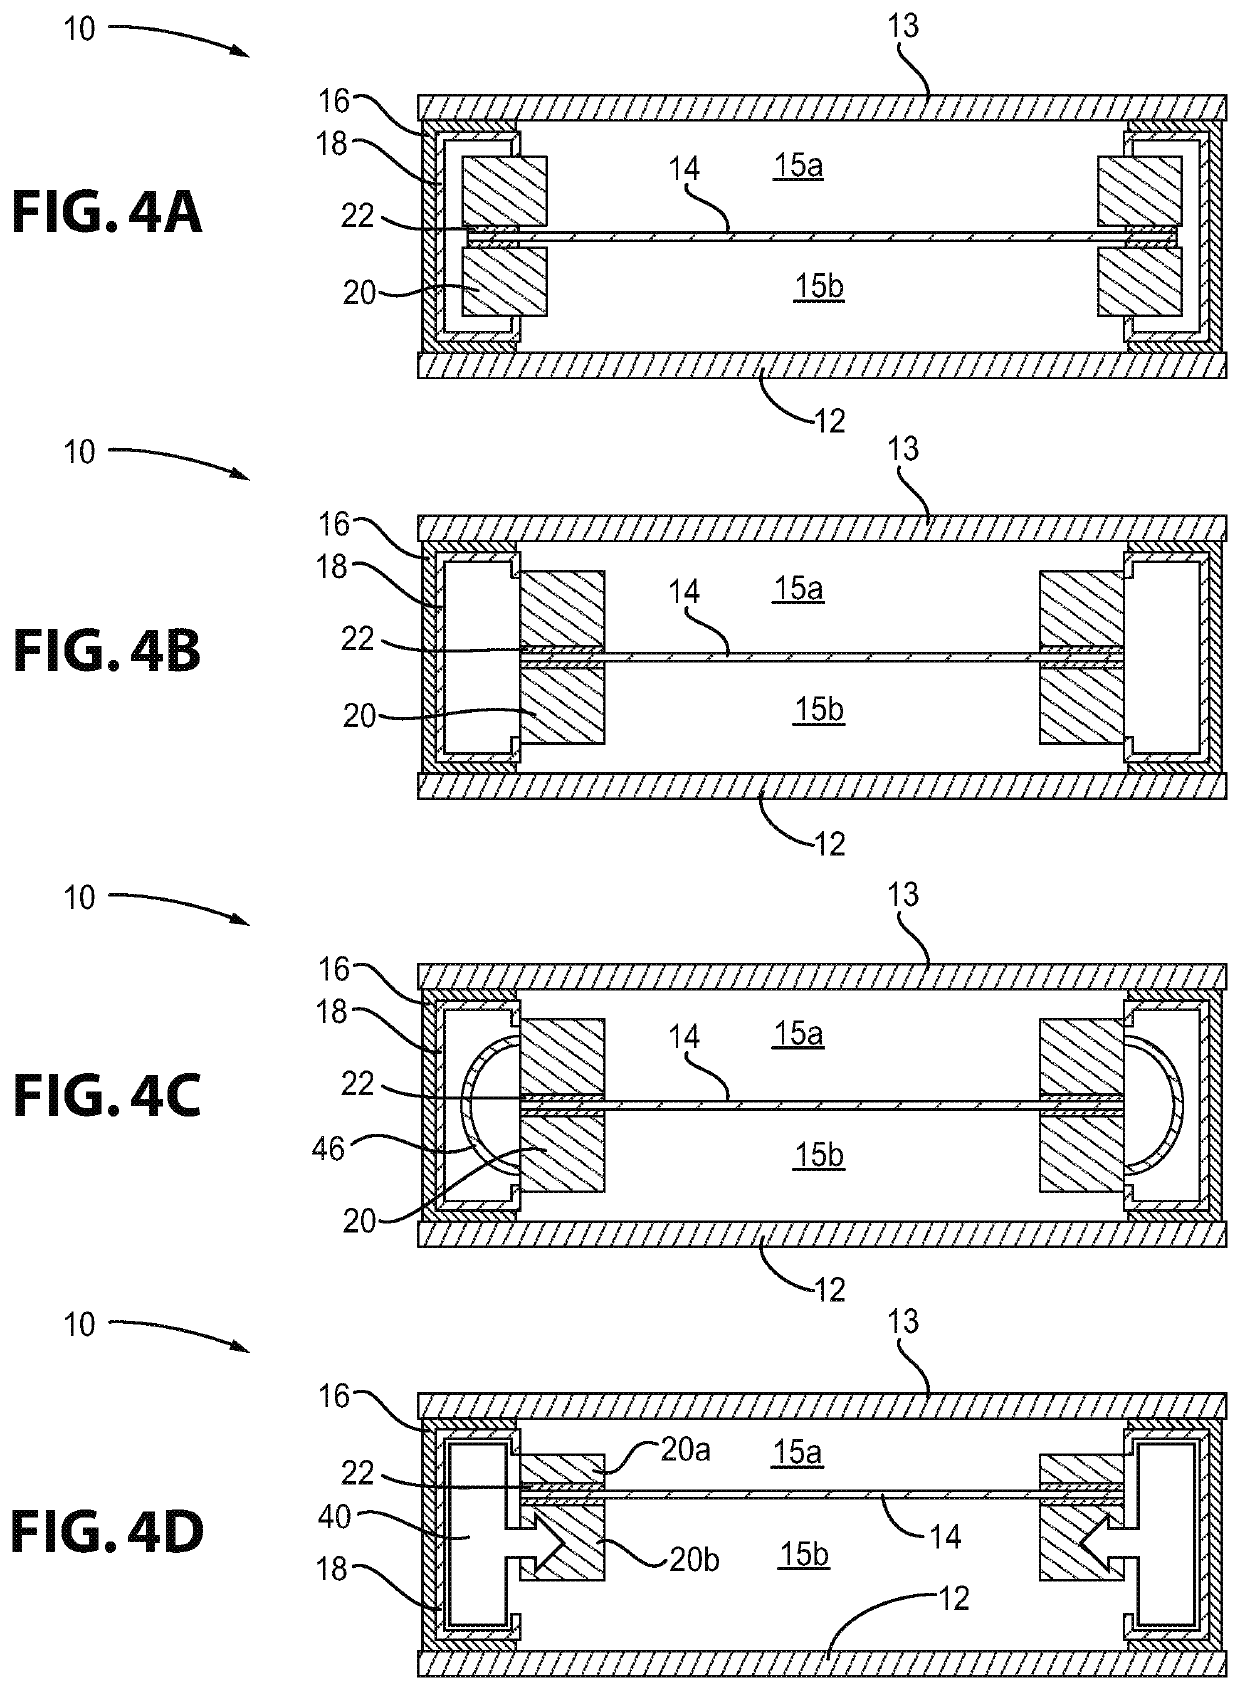 Multi-Pane Insulating Glass Unit Having a Rigid Frame for a Third Pane and Method of Making the Same